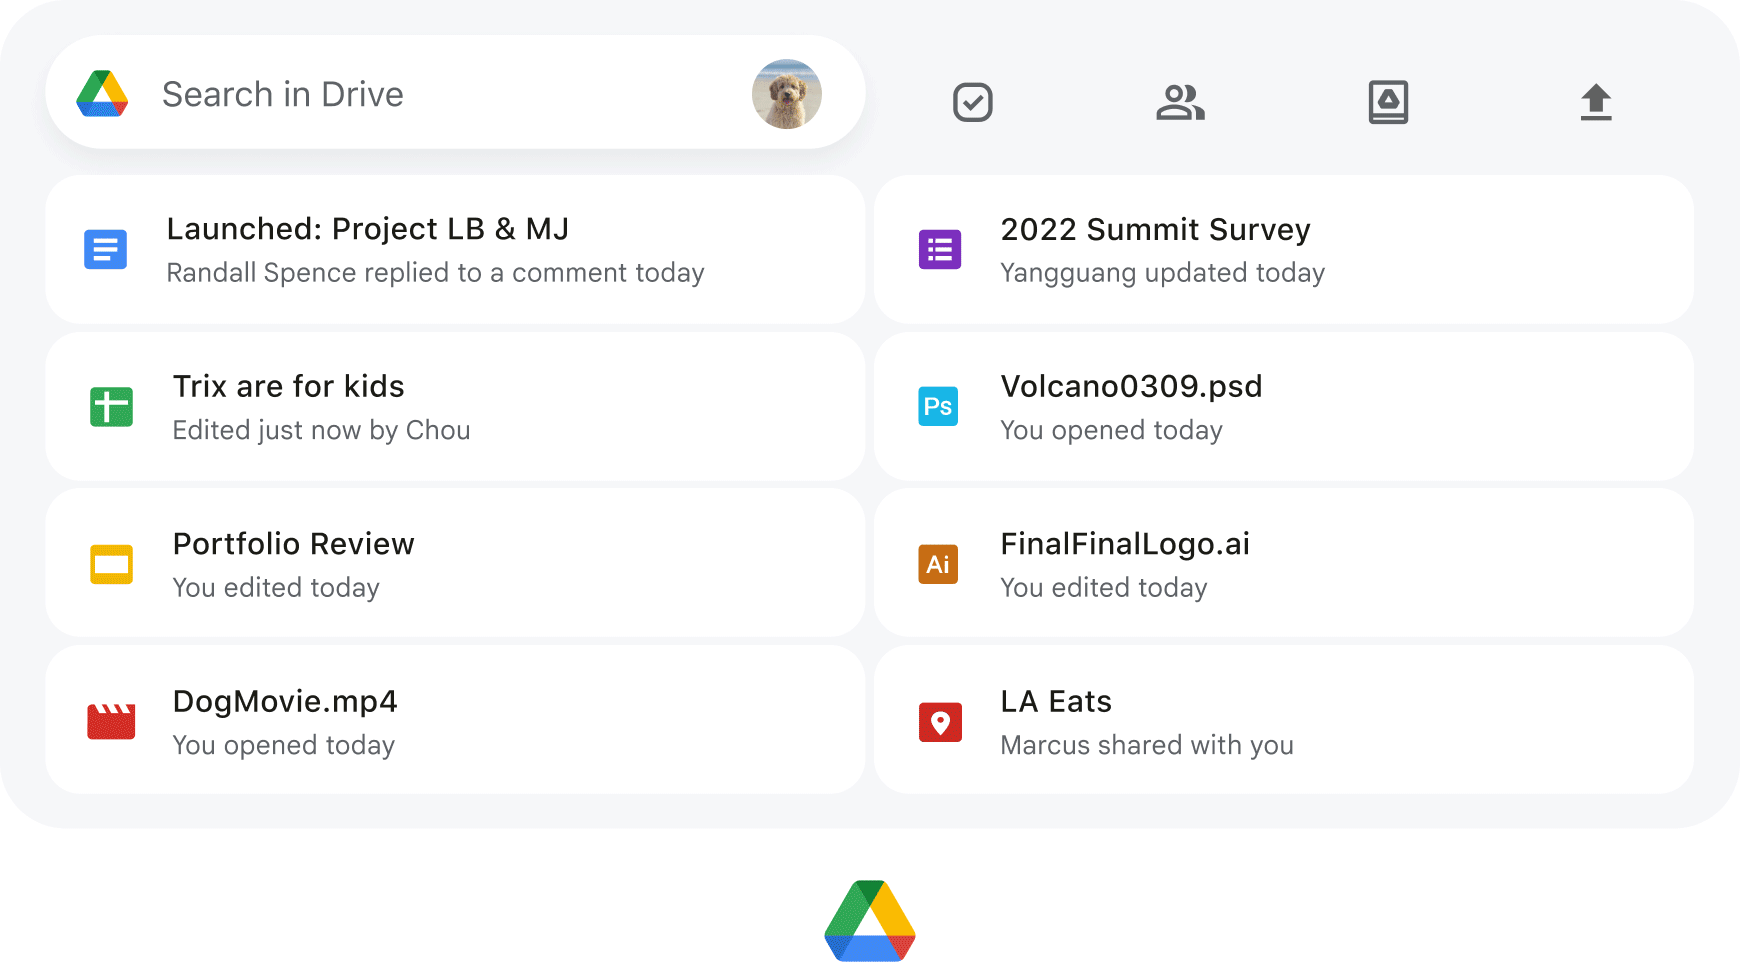 The Google Drive XL widget animates between light and dark mode on iOS. It has a “Search in Drive” text bar, along with various Docs, Sheets and Slides.